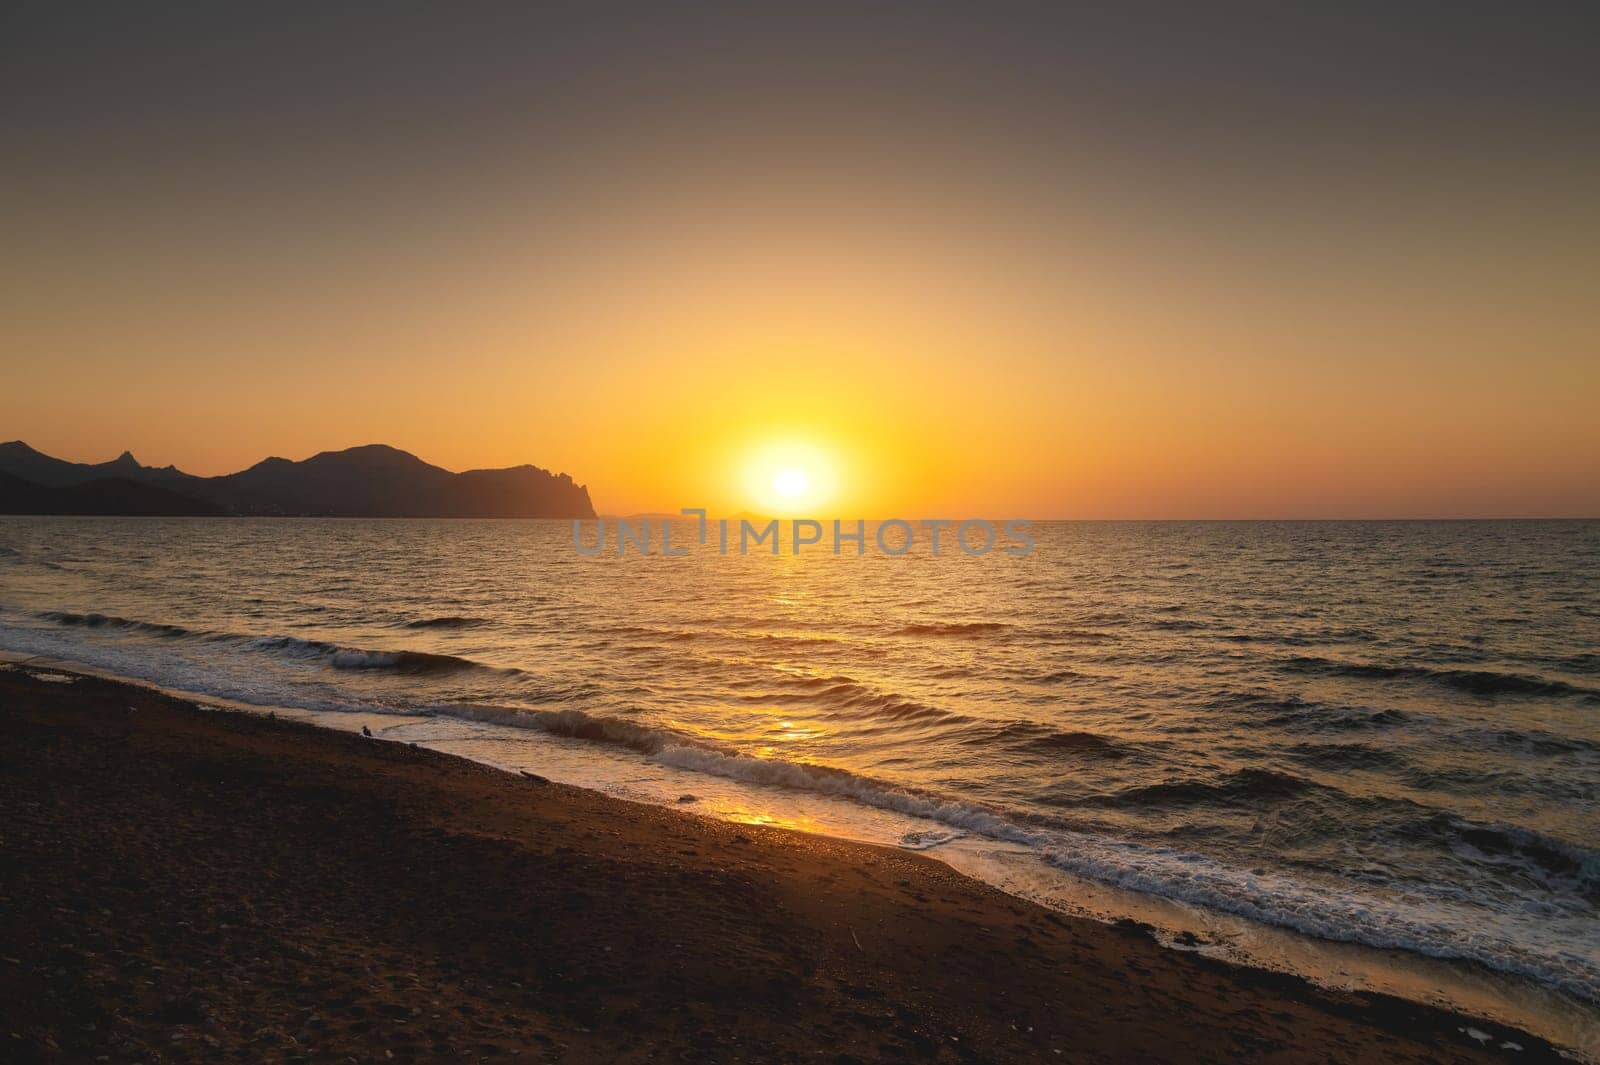 Beautiful sunrise over the sea. A serene beach at sunset, golden rays casting a warm glow on the sand and gently crashing waves.